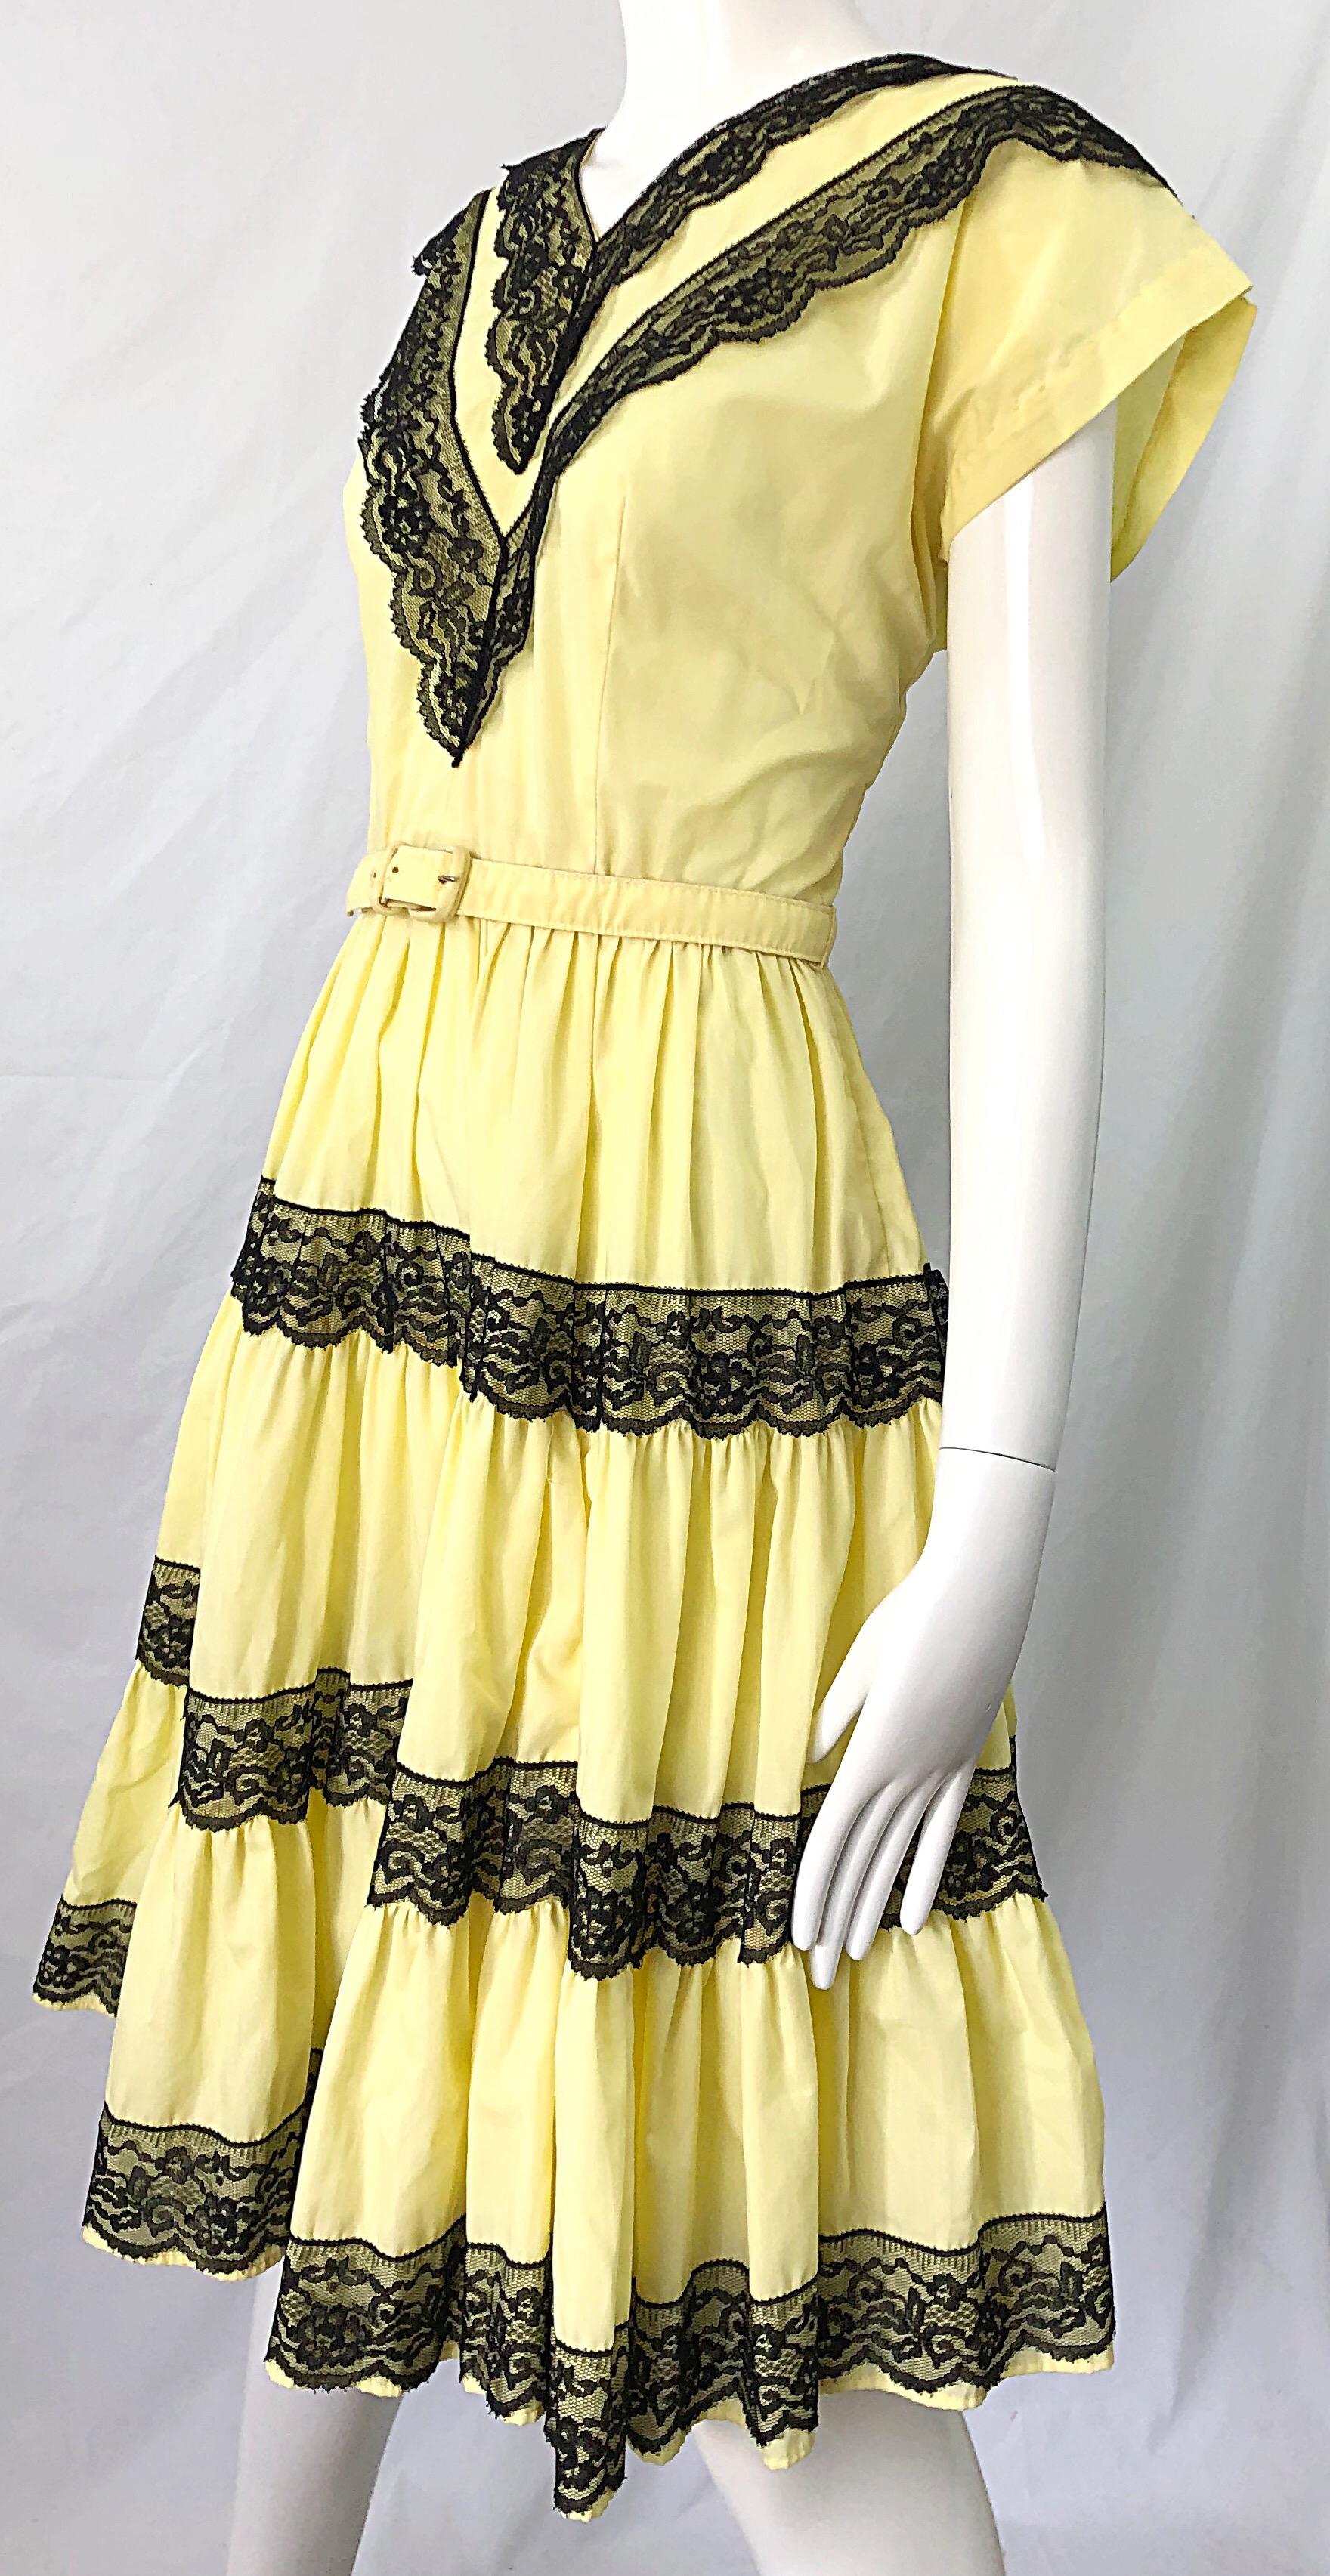 1950s Bettina of Miami Yellow + Black Cotton Lace Fit n' Flare Vintage 50s Dress For Sale 6